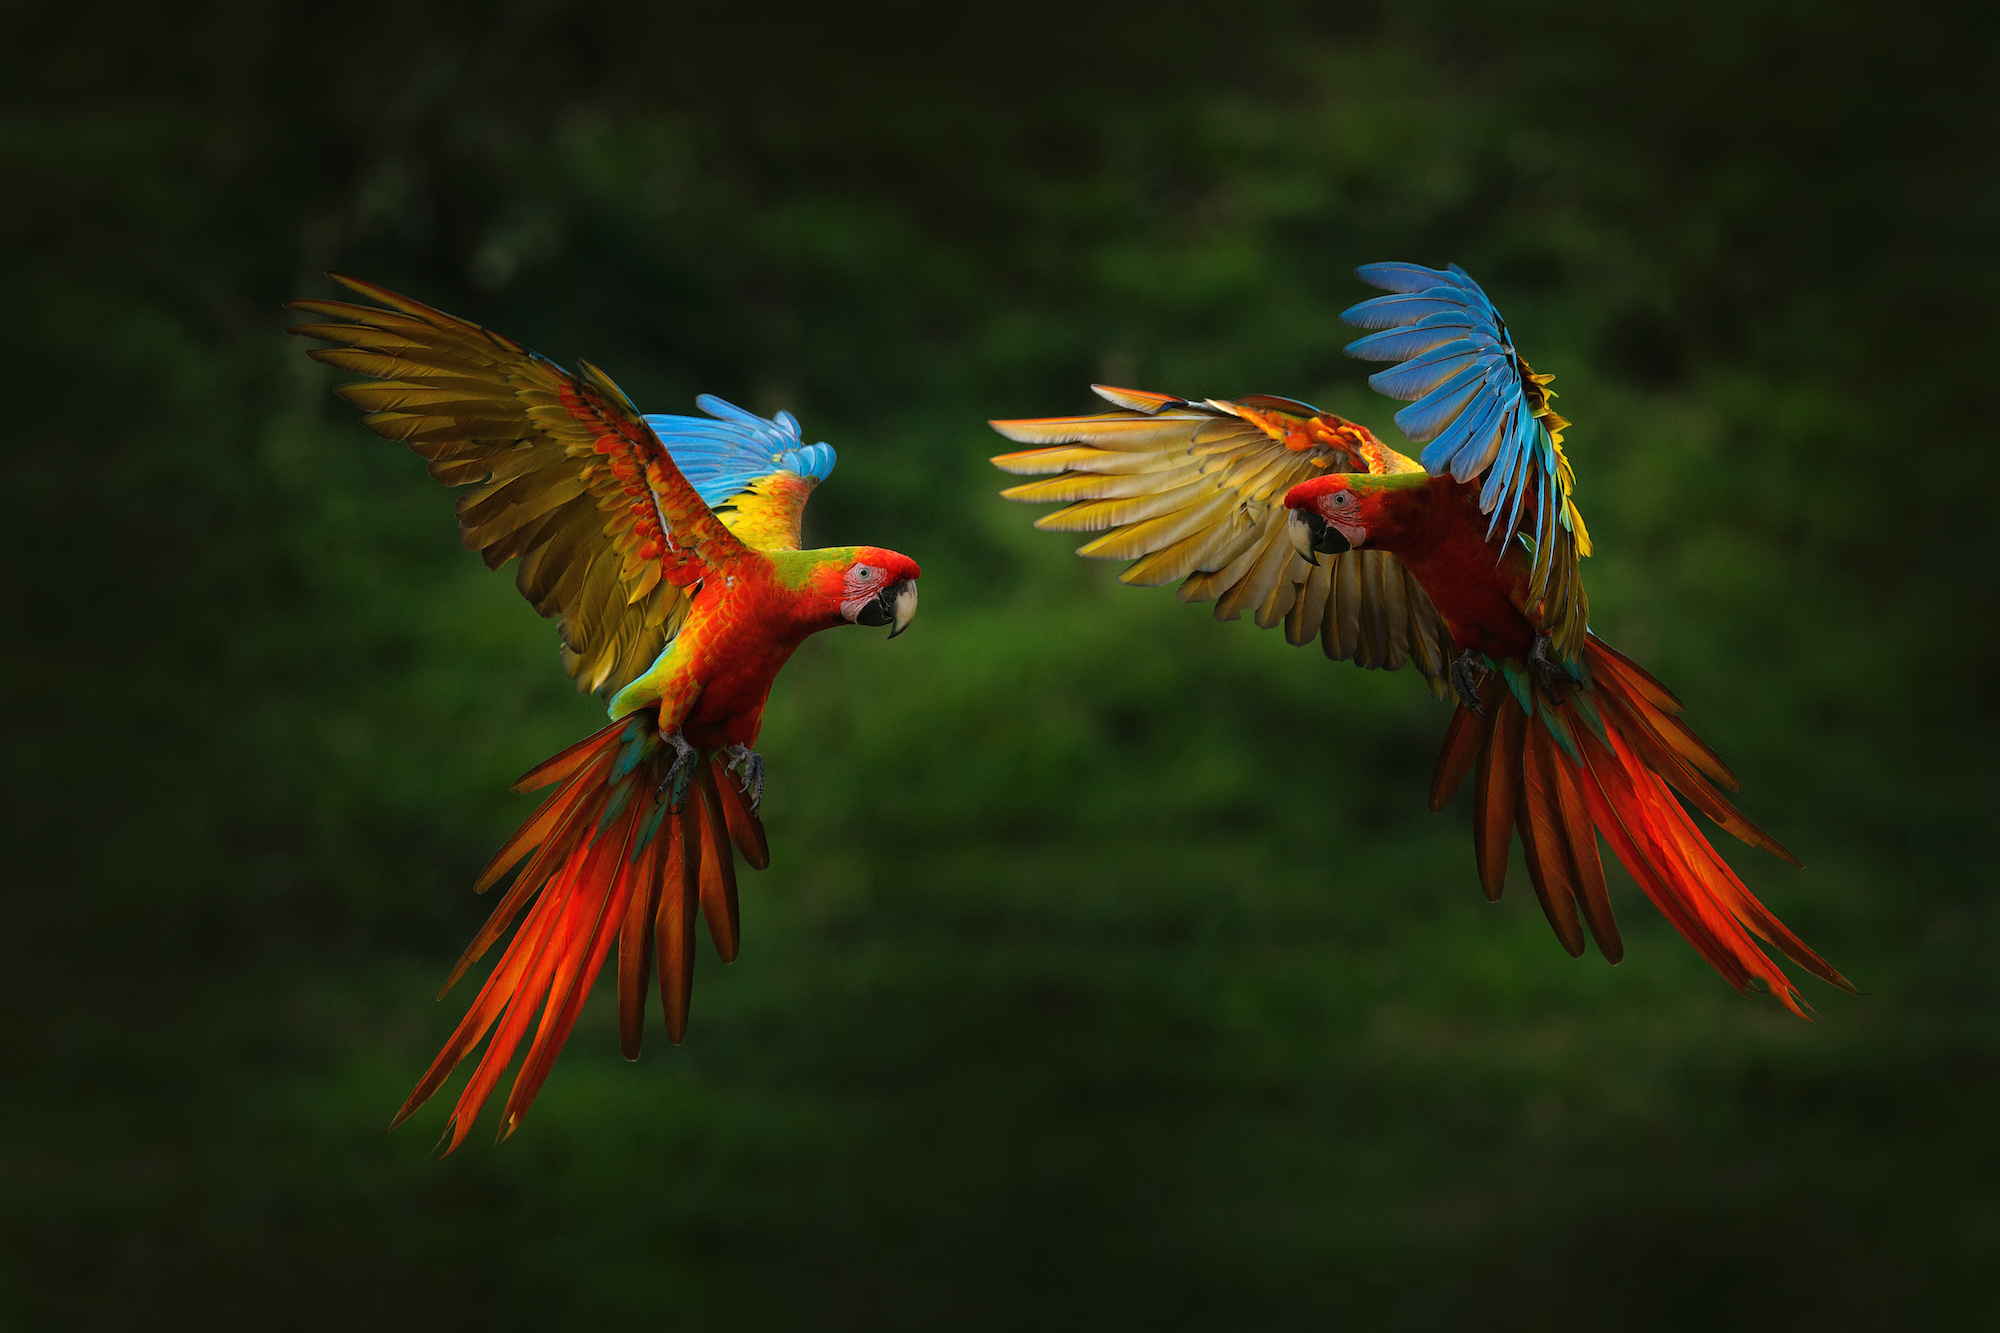 30 Colorful Facts About Parrots - The Fact Site